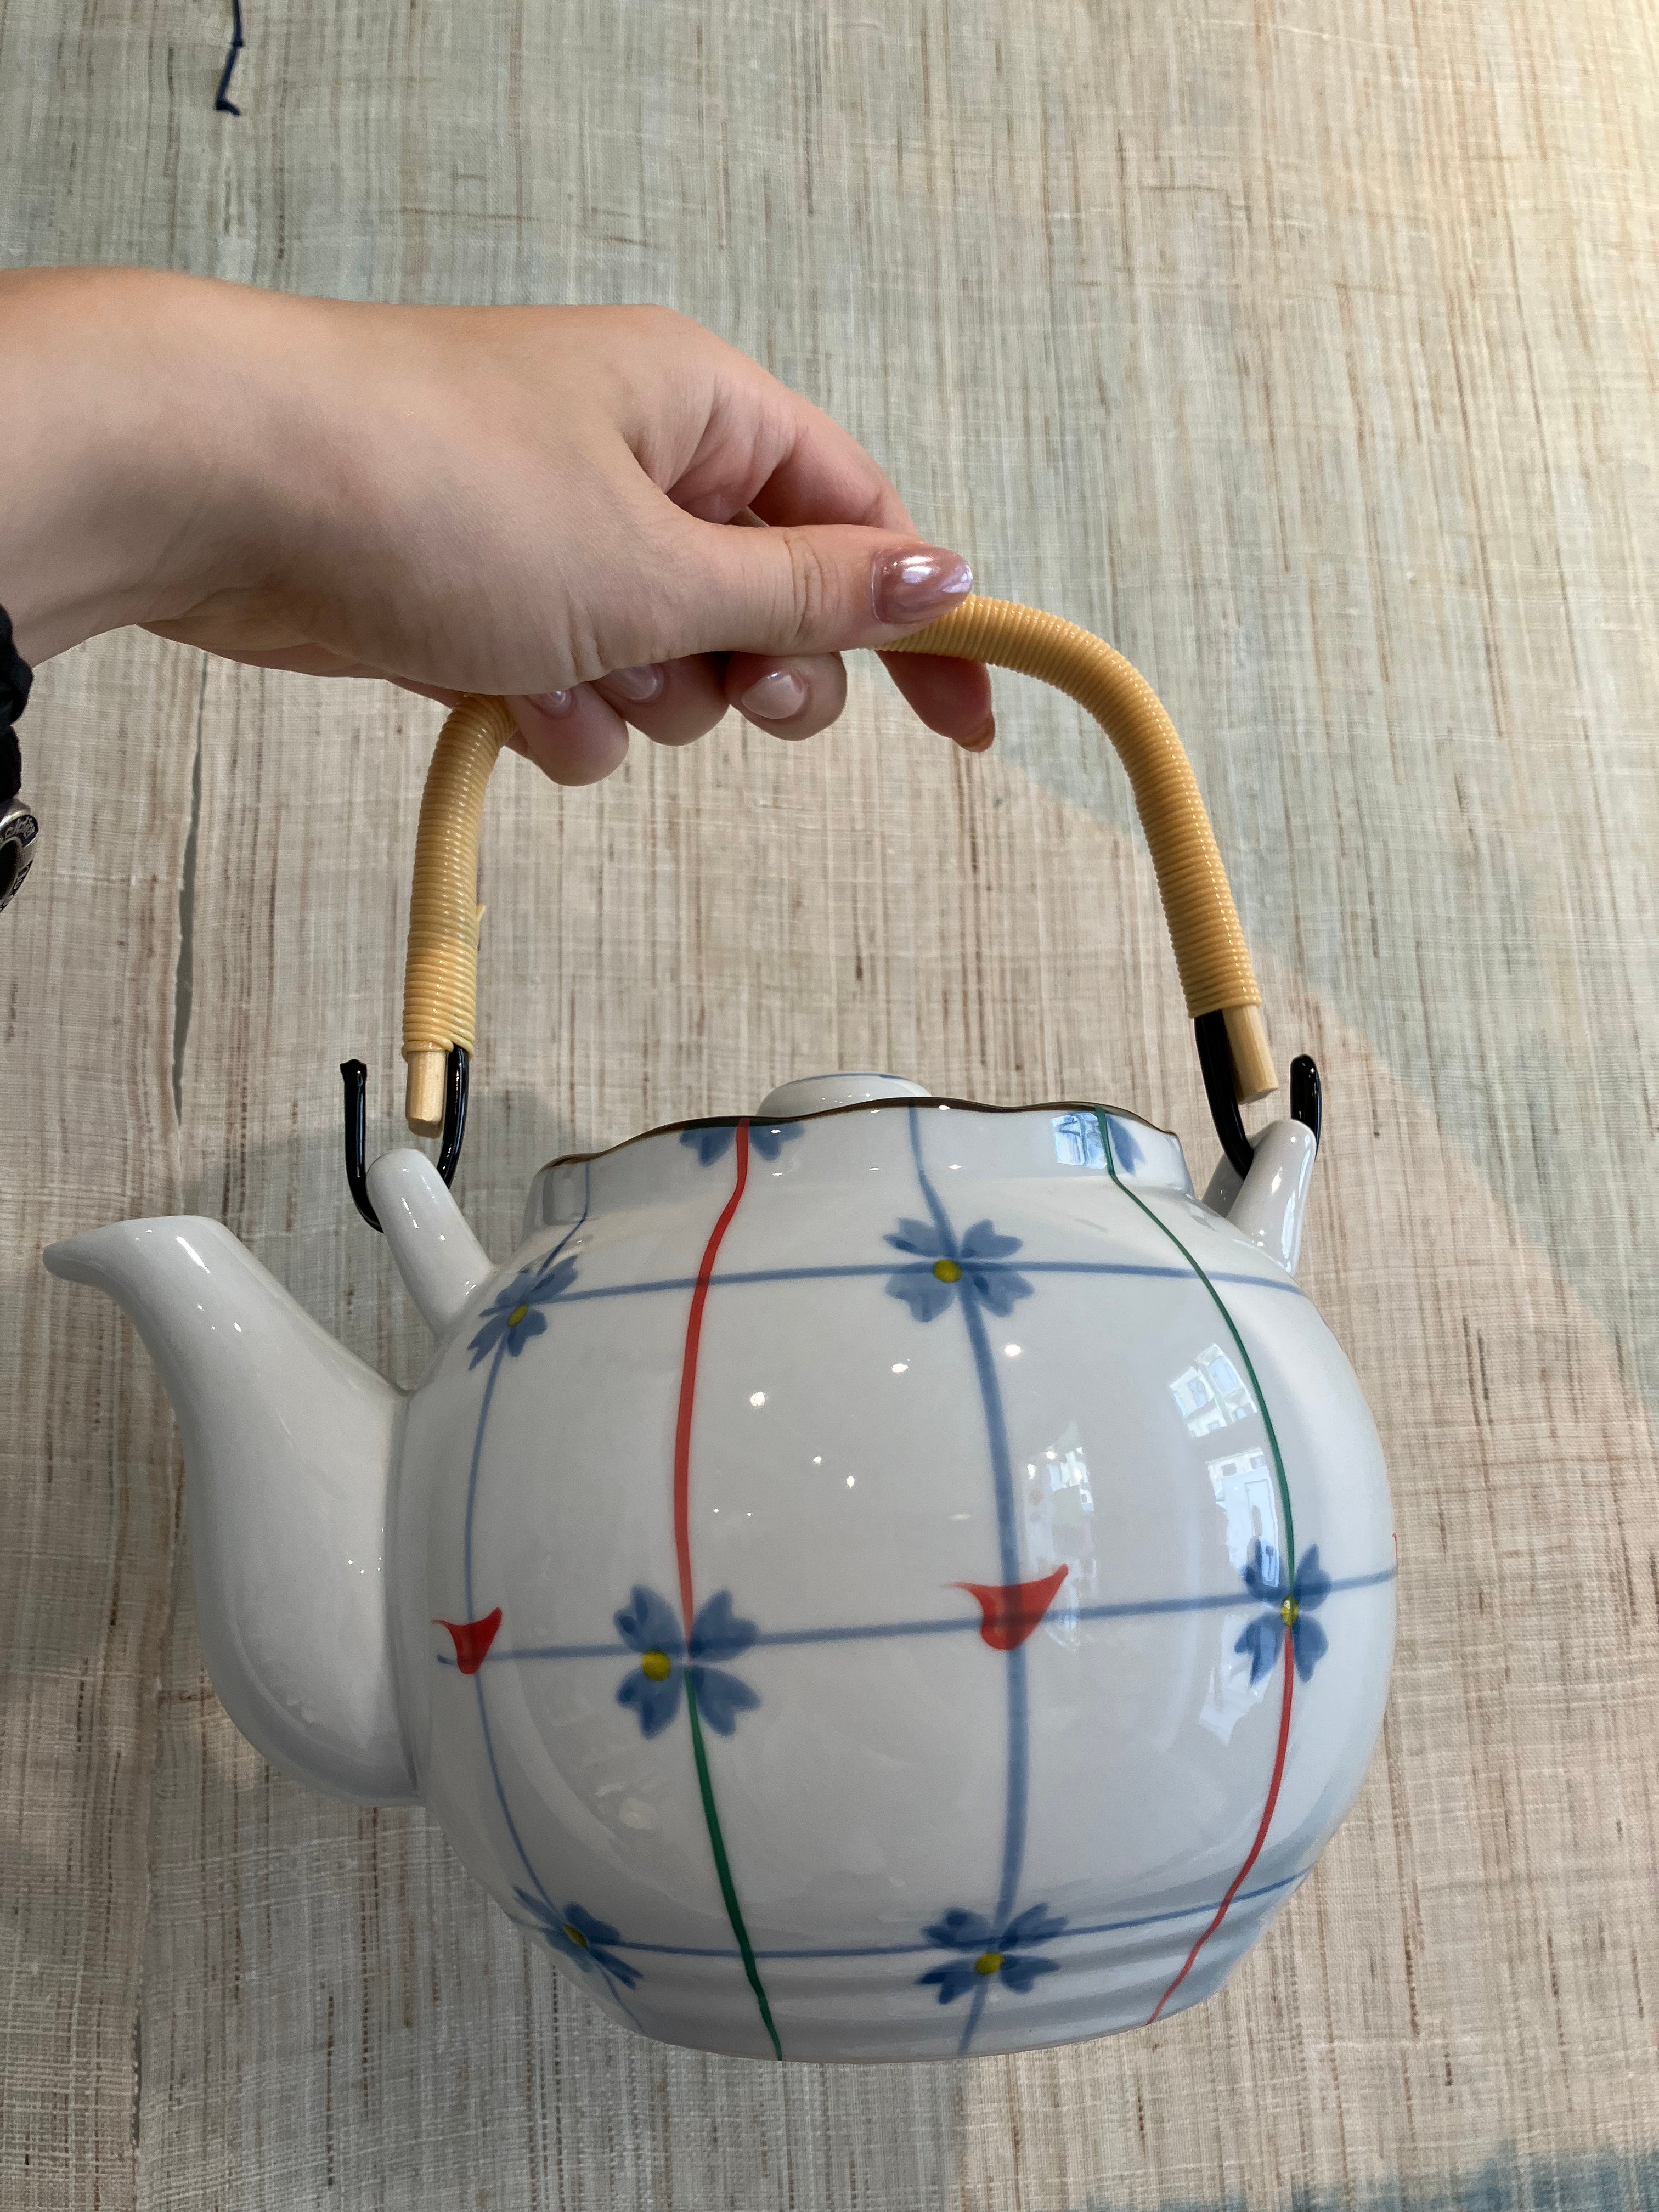 Japanese teapot with flowers and stripes